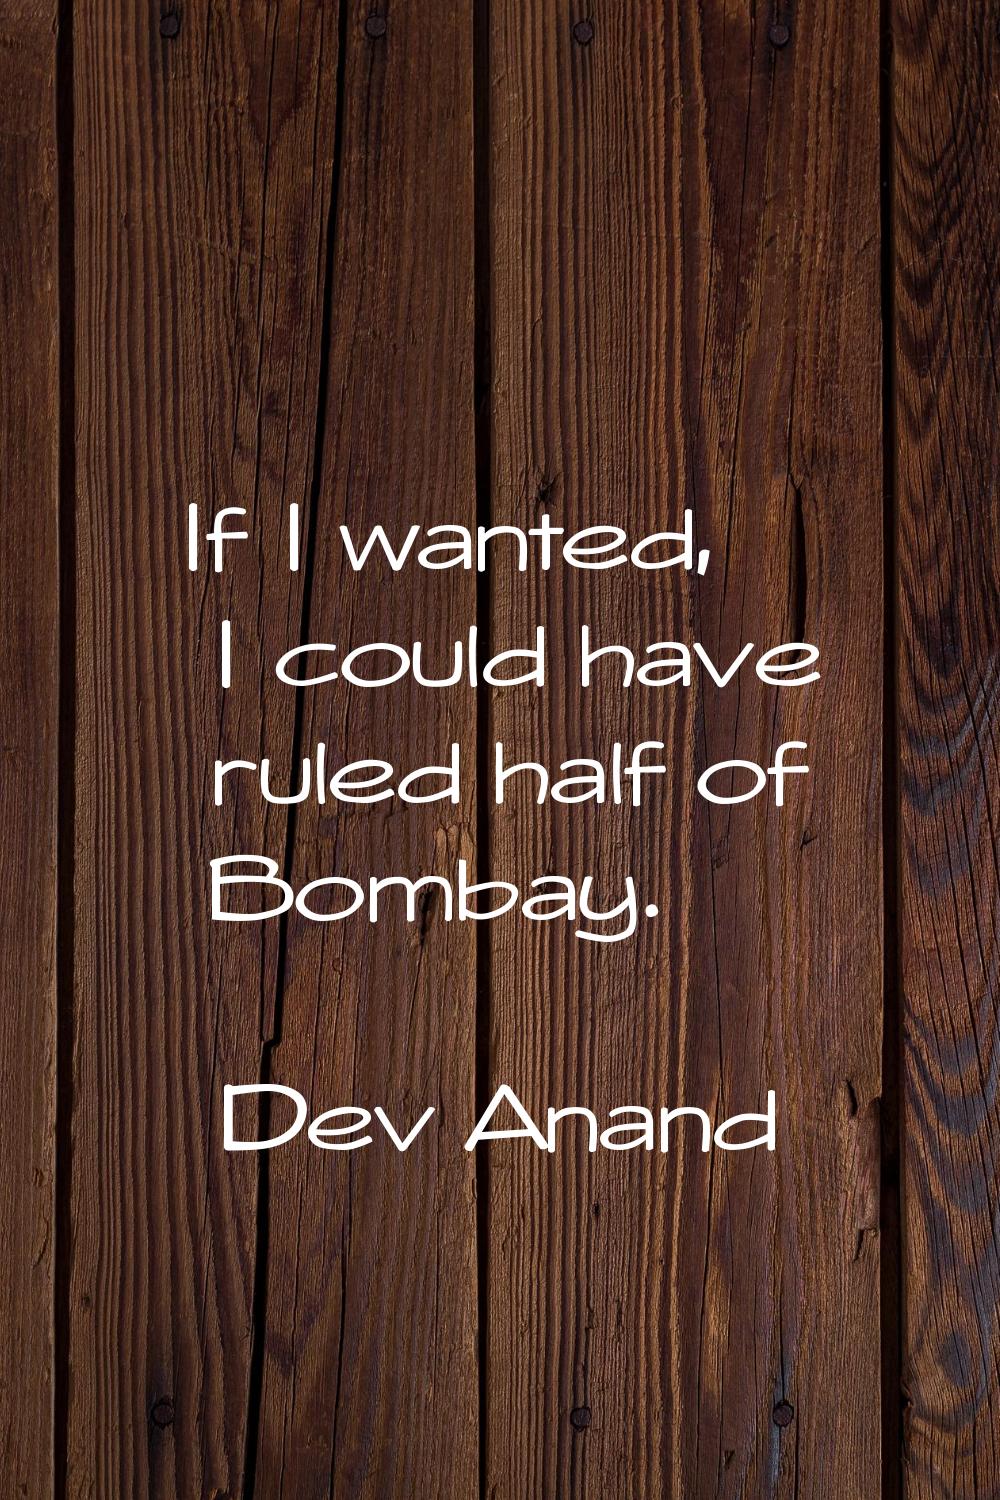 If I wanted, I could have ruled half of Bombay.